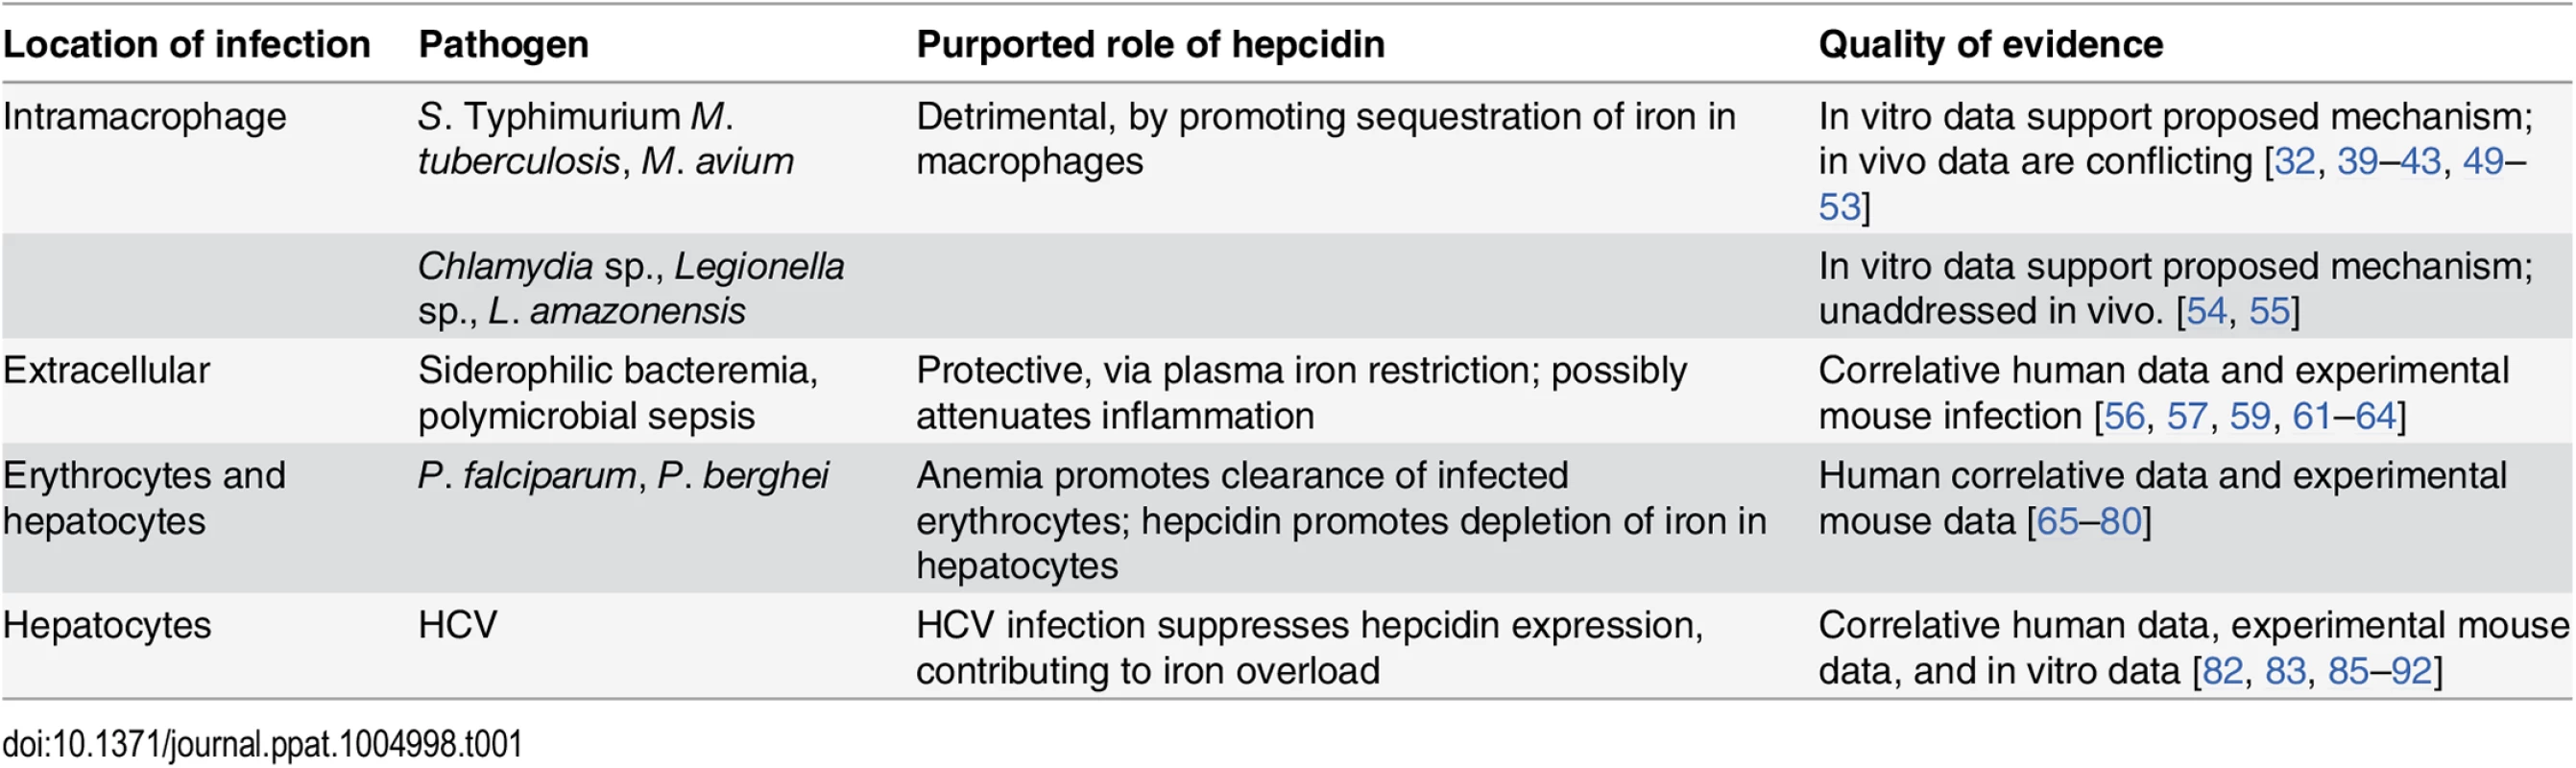 Summary of the role of hepcidin in specific infections.